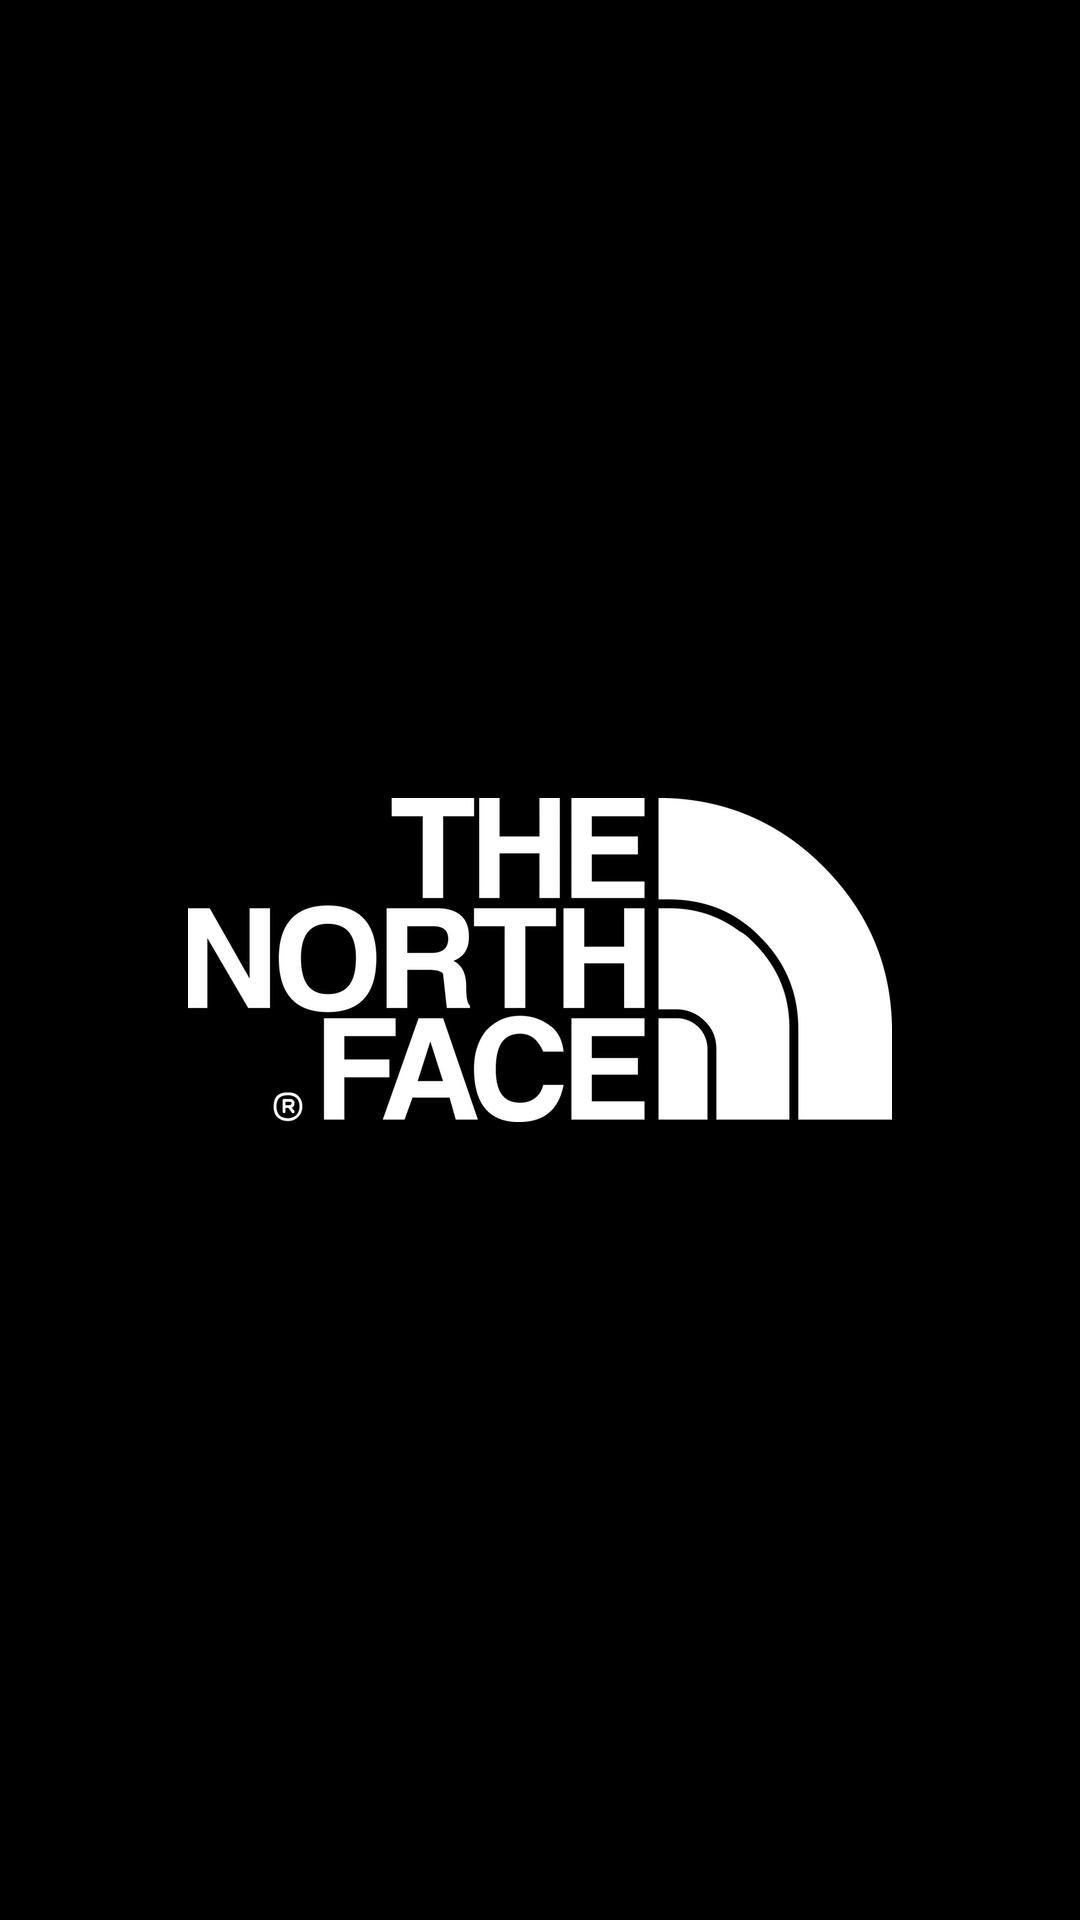 The North Face Logo Wallpapers - Top Free The North Face Logo